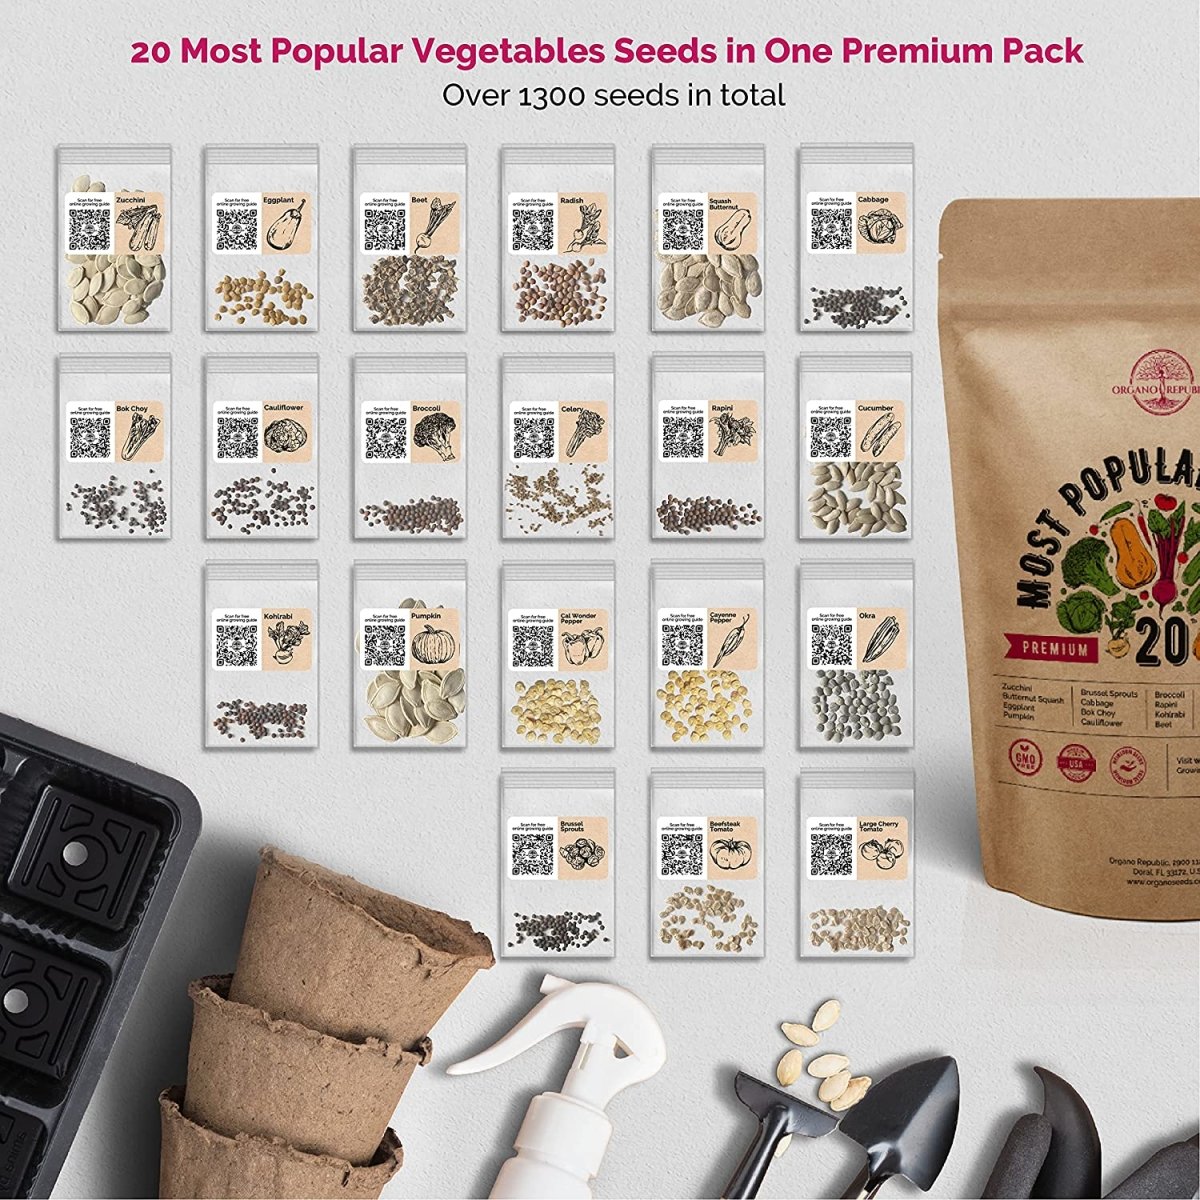 Beet Microgreens & 20 Most Popular Vegetables Seeds Bundle Non-GMO Heirloom Seeds for Planting Indoor and Outdoor Over 21,300 Microgreen & Vegetables Seeds in One Value Bundle - Organo Republic